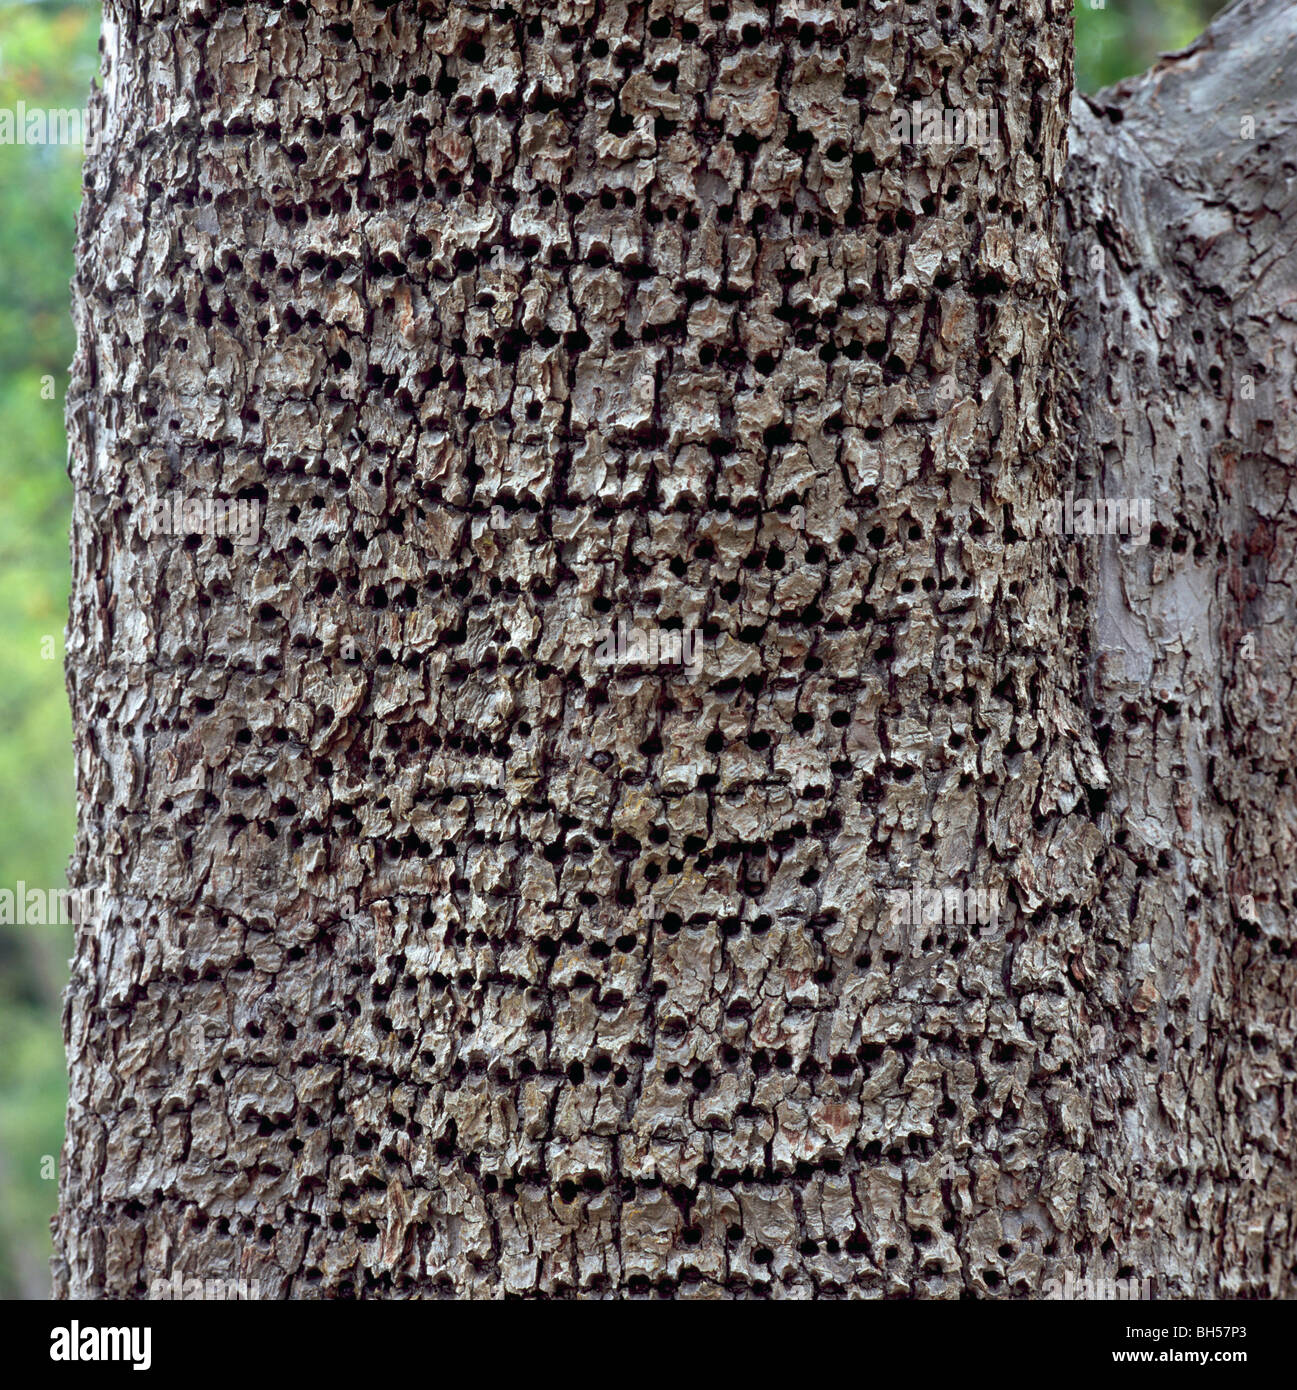 Woodpecker Tree Damage - Small Holes drilled in Pear Tree Trunk and Bark by Yellow-Bellied Sapsucker (Sphyrapicus varius) Bird Stock Photo